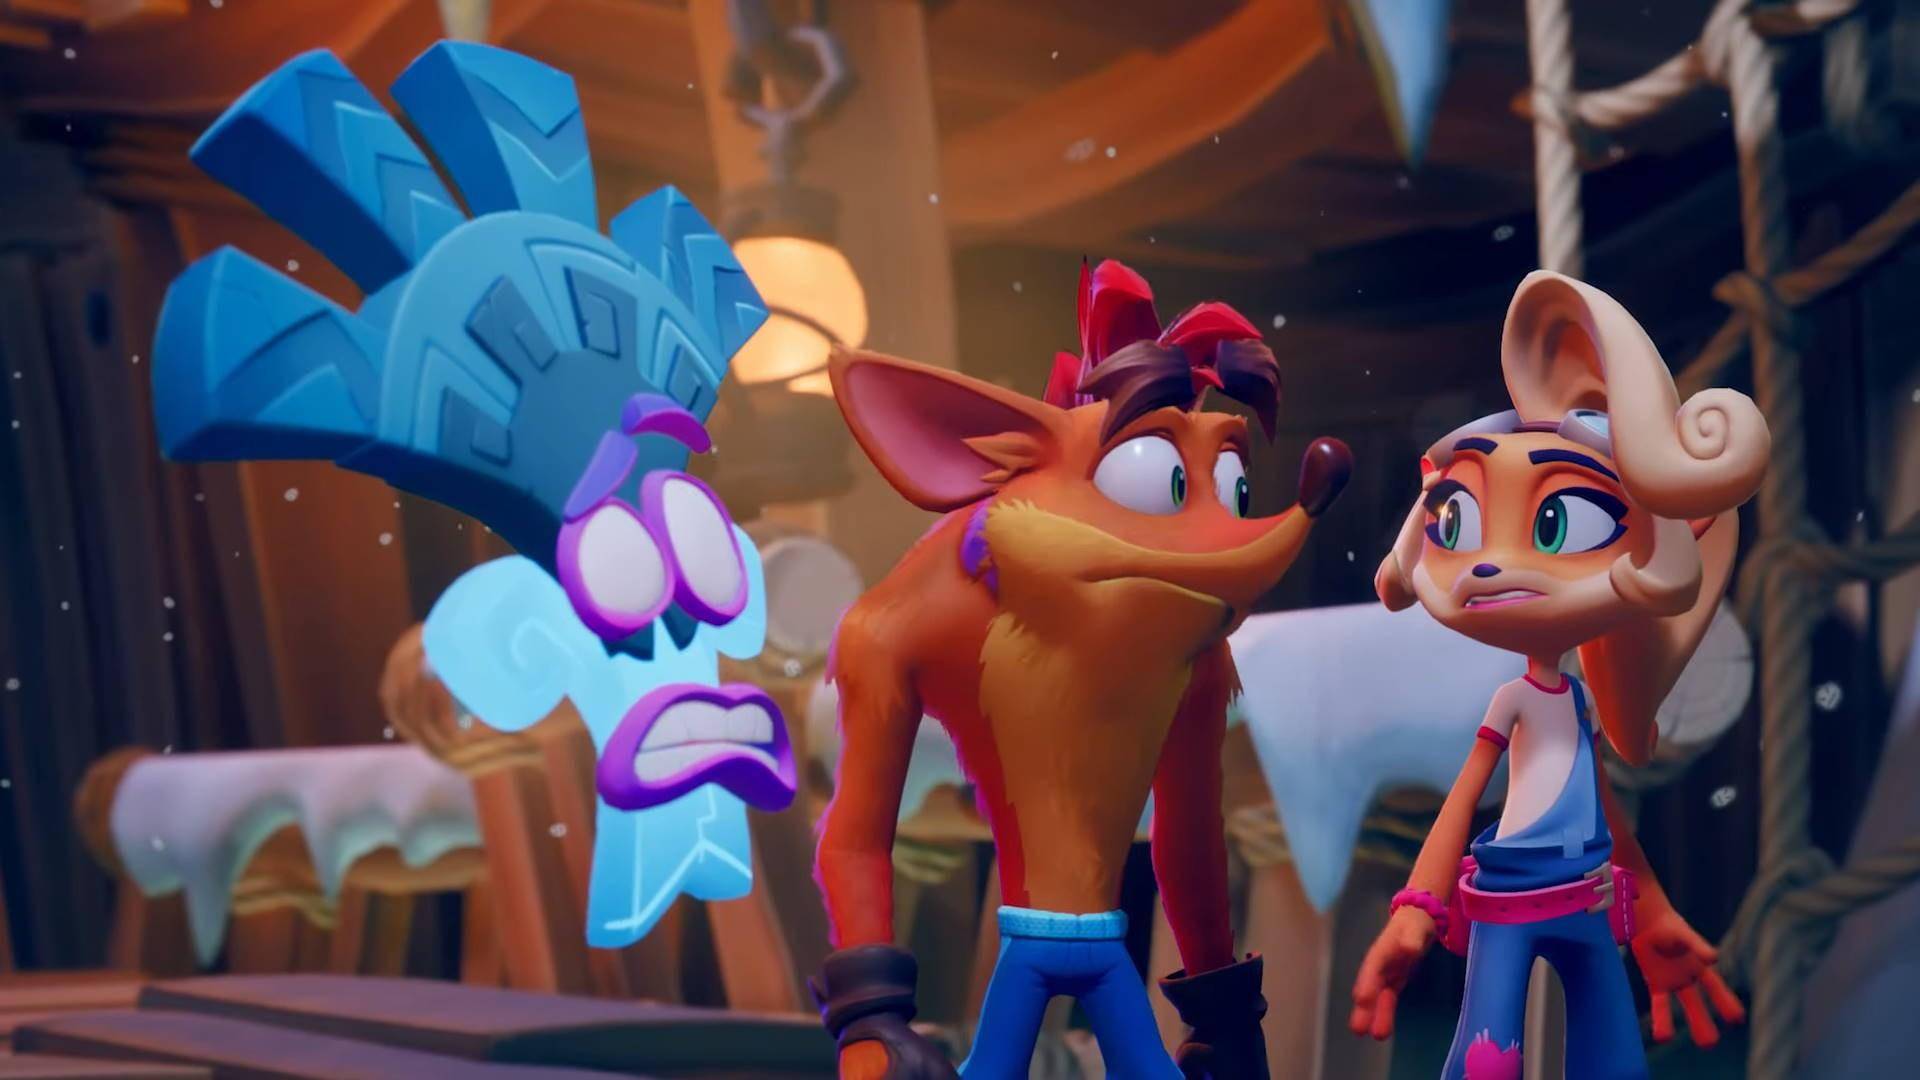 Crash Bandicoot 4: It's About Time details its gameplay